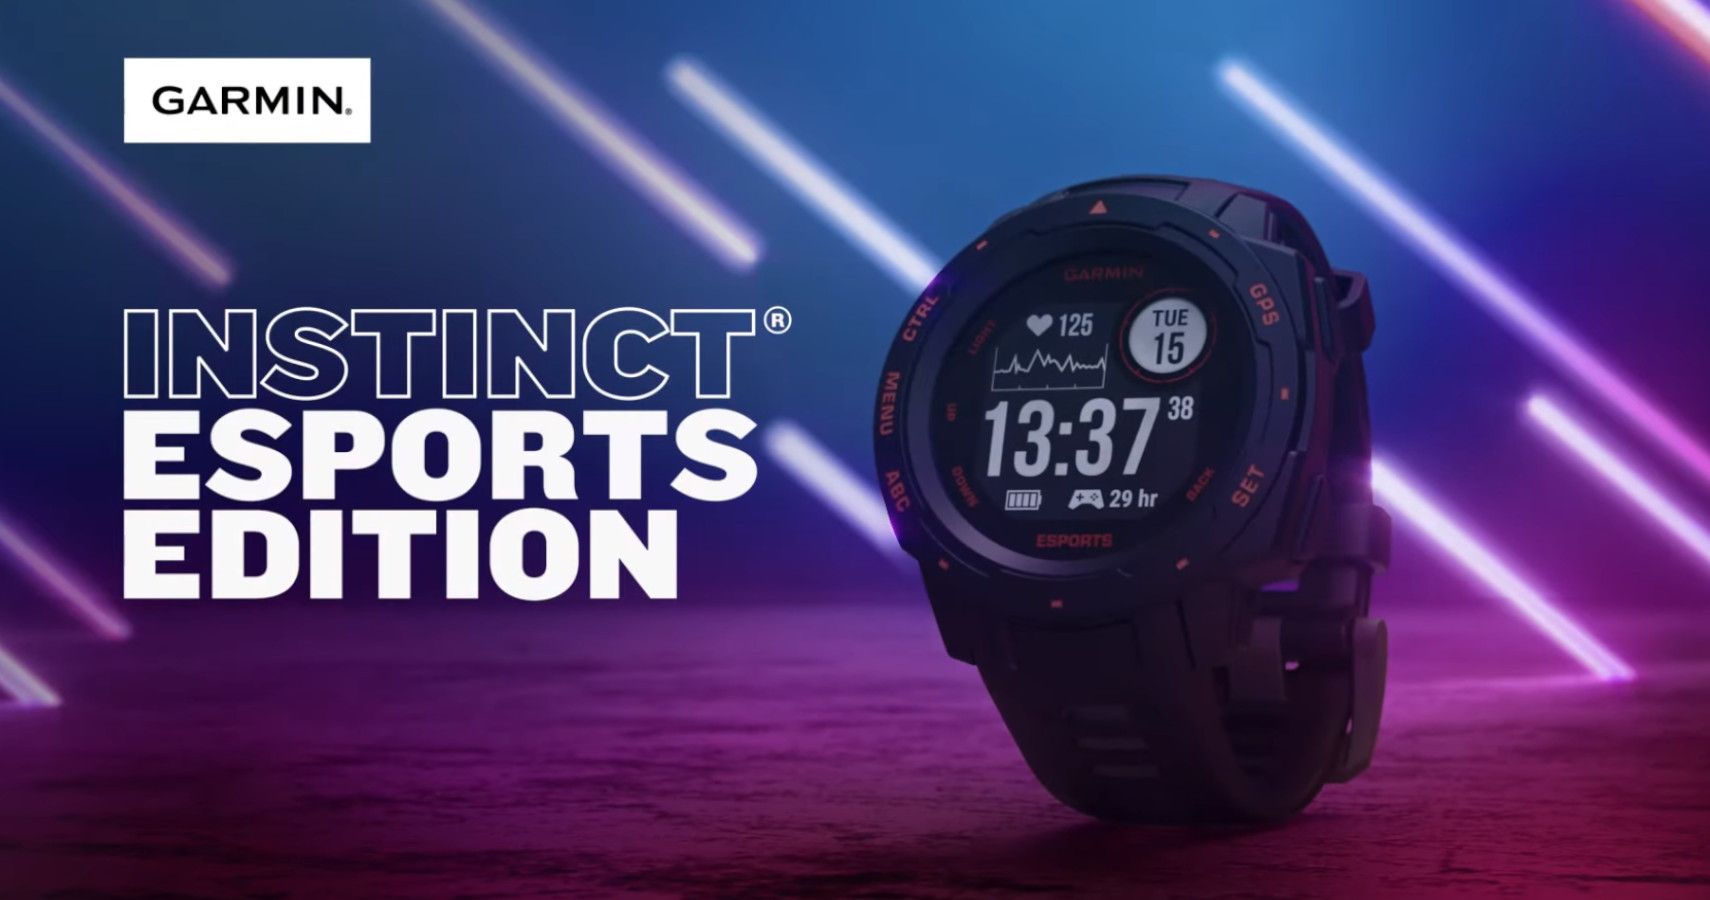 Garmin Instinct Esports Edition Review The Ultimate Gaming Smart Watch